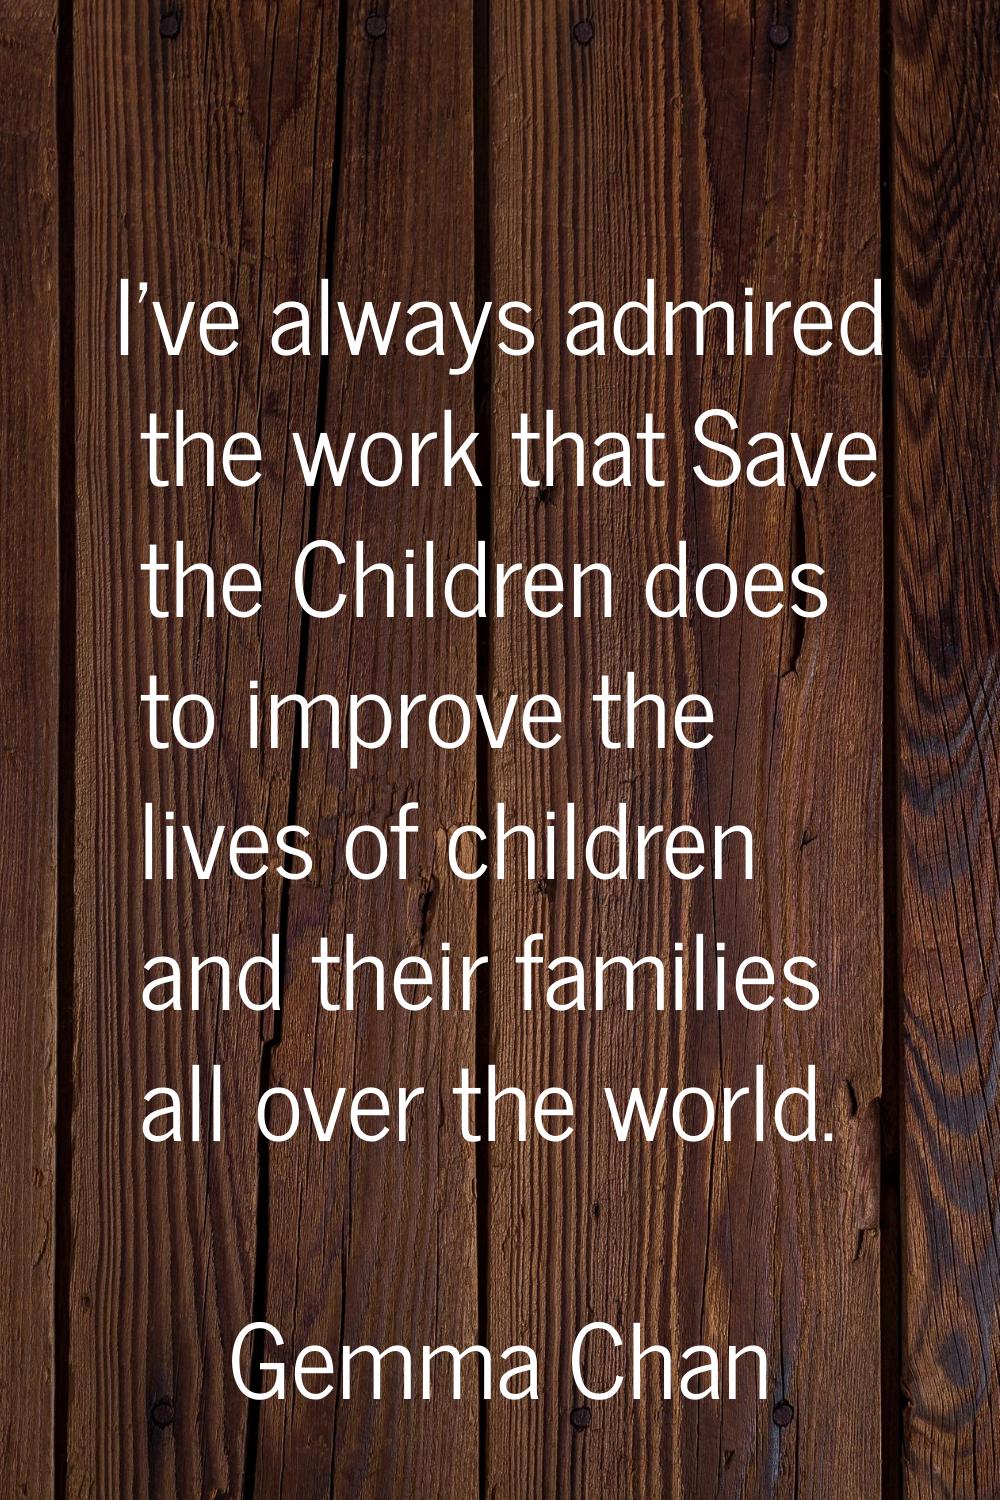 I've always admired the work that Save the Children does to improve the lives of children and their